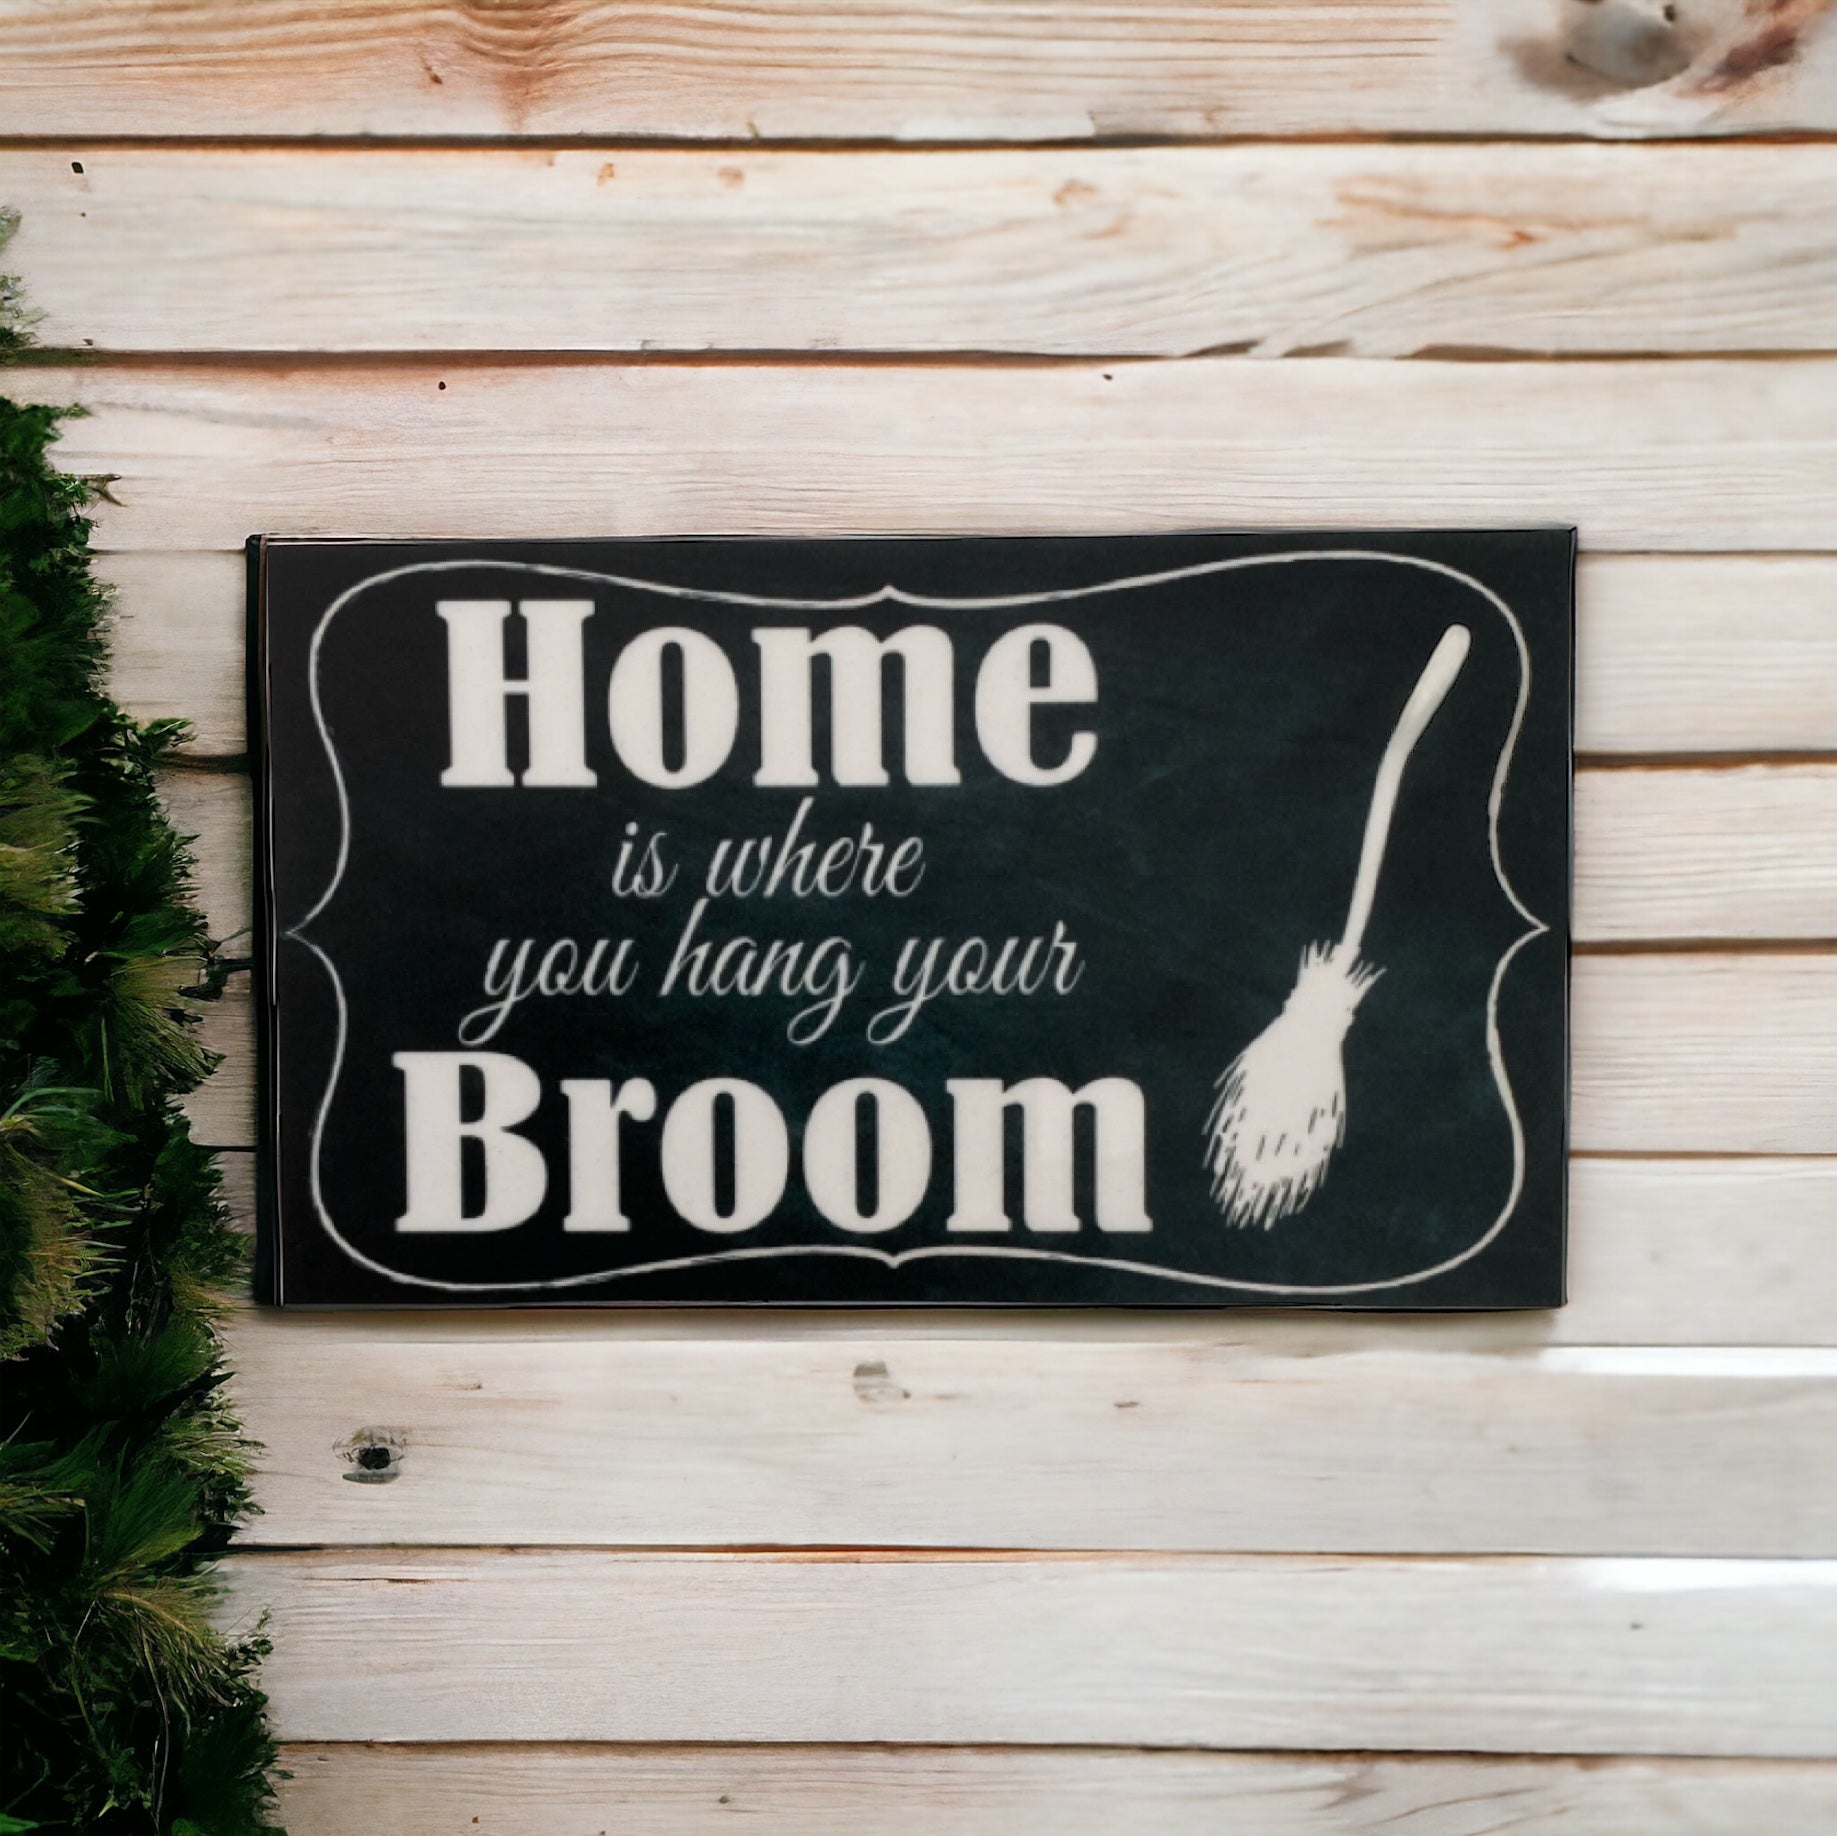 Home Where You Hang Your Broom Vintage Witch Sign - The Renmy Store Homewares & Gifts 